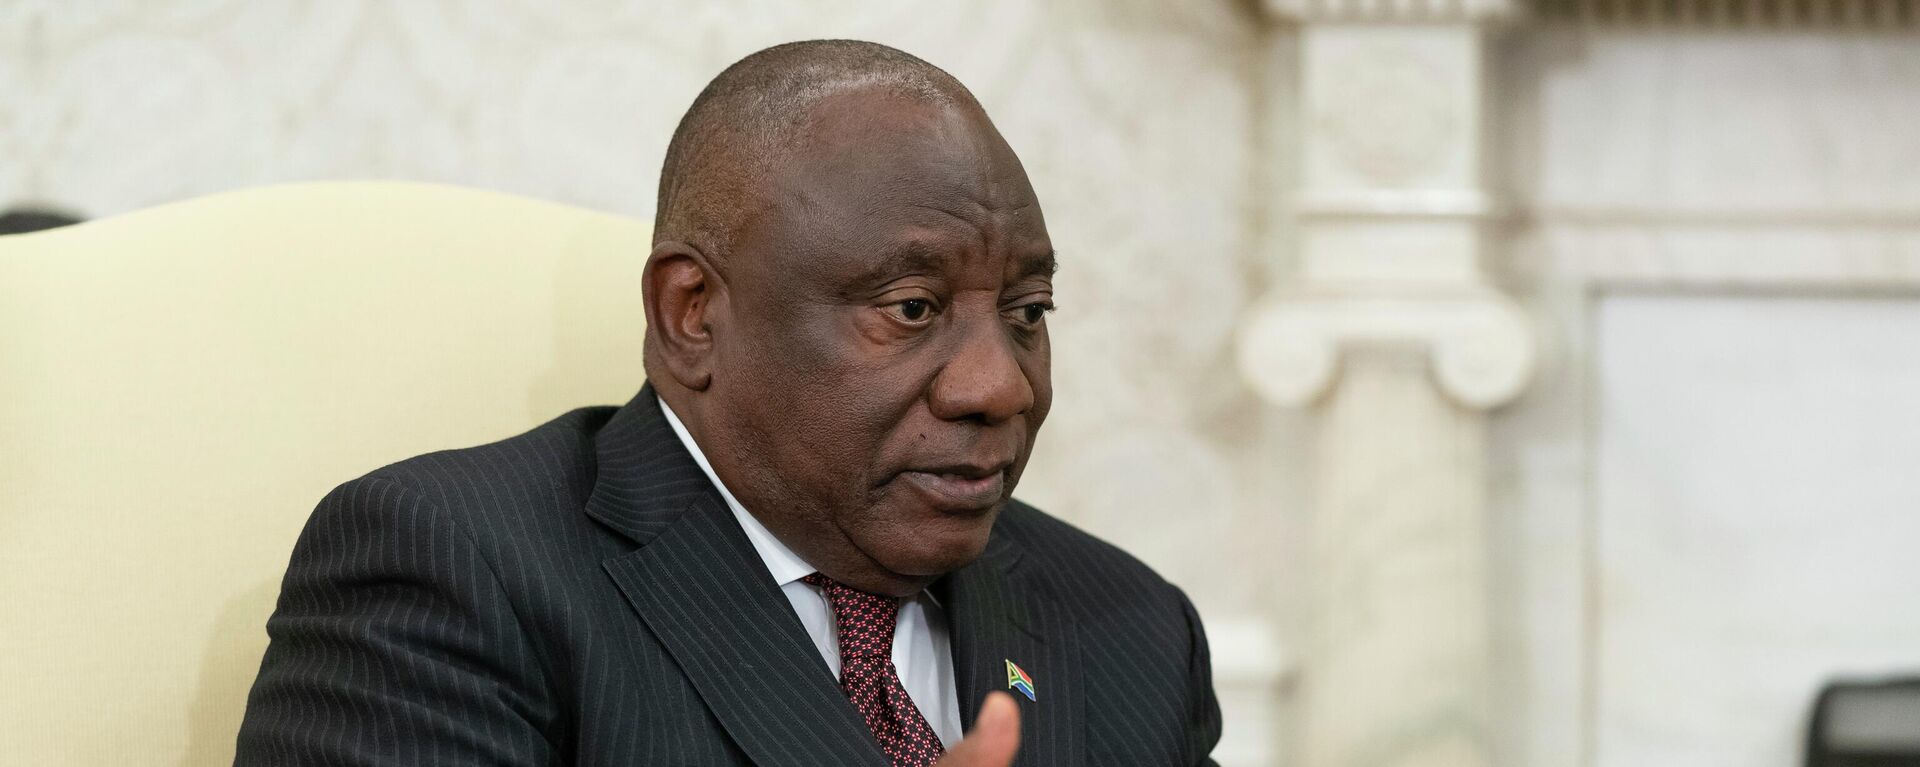 South African President Cyril Ramaphosa speaks during a meeting with President Joe Biden in the Oval Office of the White House, Friday, Sept. 16, 2022, in Washington. (AP Photo/Alex Brandon) - Sputnik International, 1920, 04.12.2022